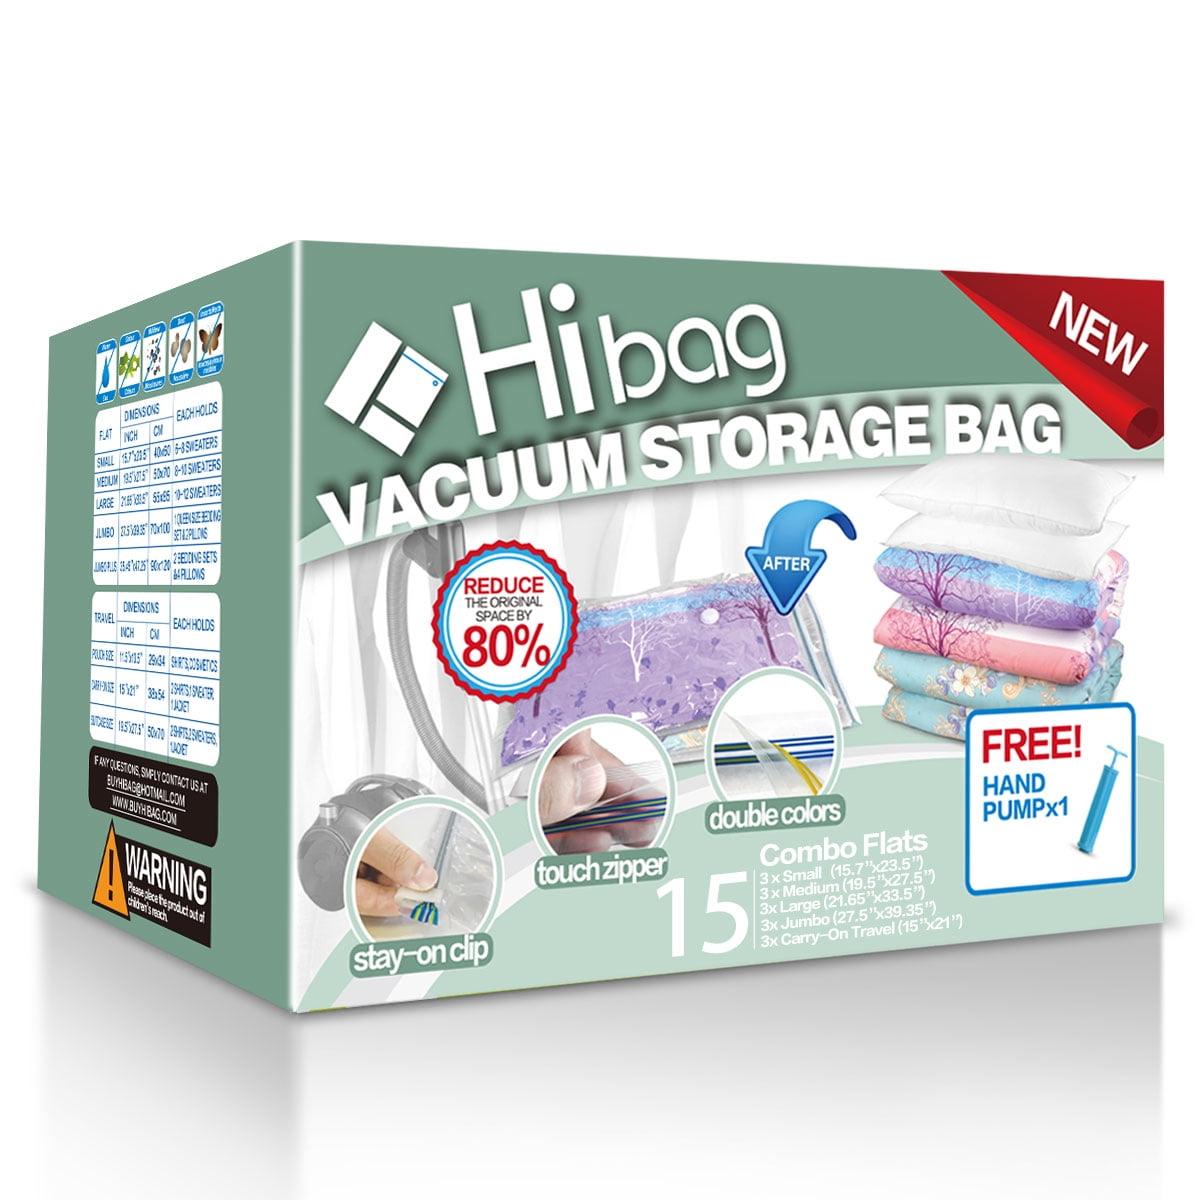 Hibag 6 Pack Vacuum Storage Bags for Clothes, Clothes Vacuum Bags Save 80%  Space, Work